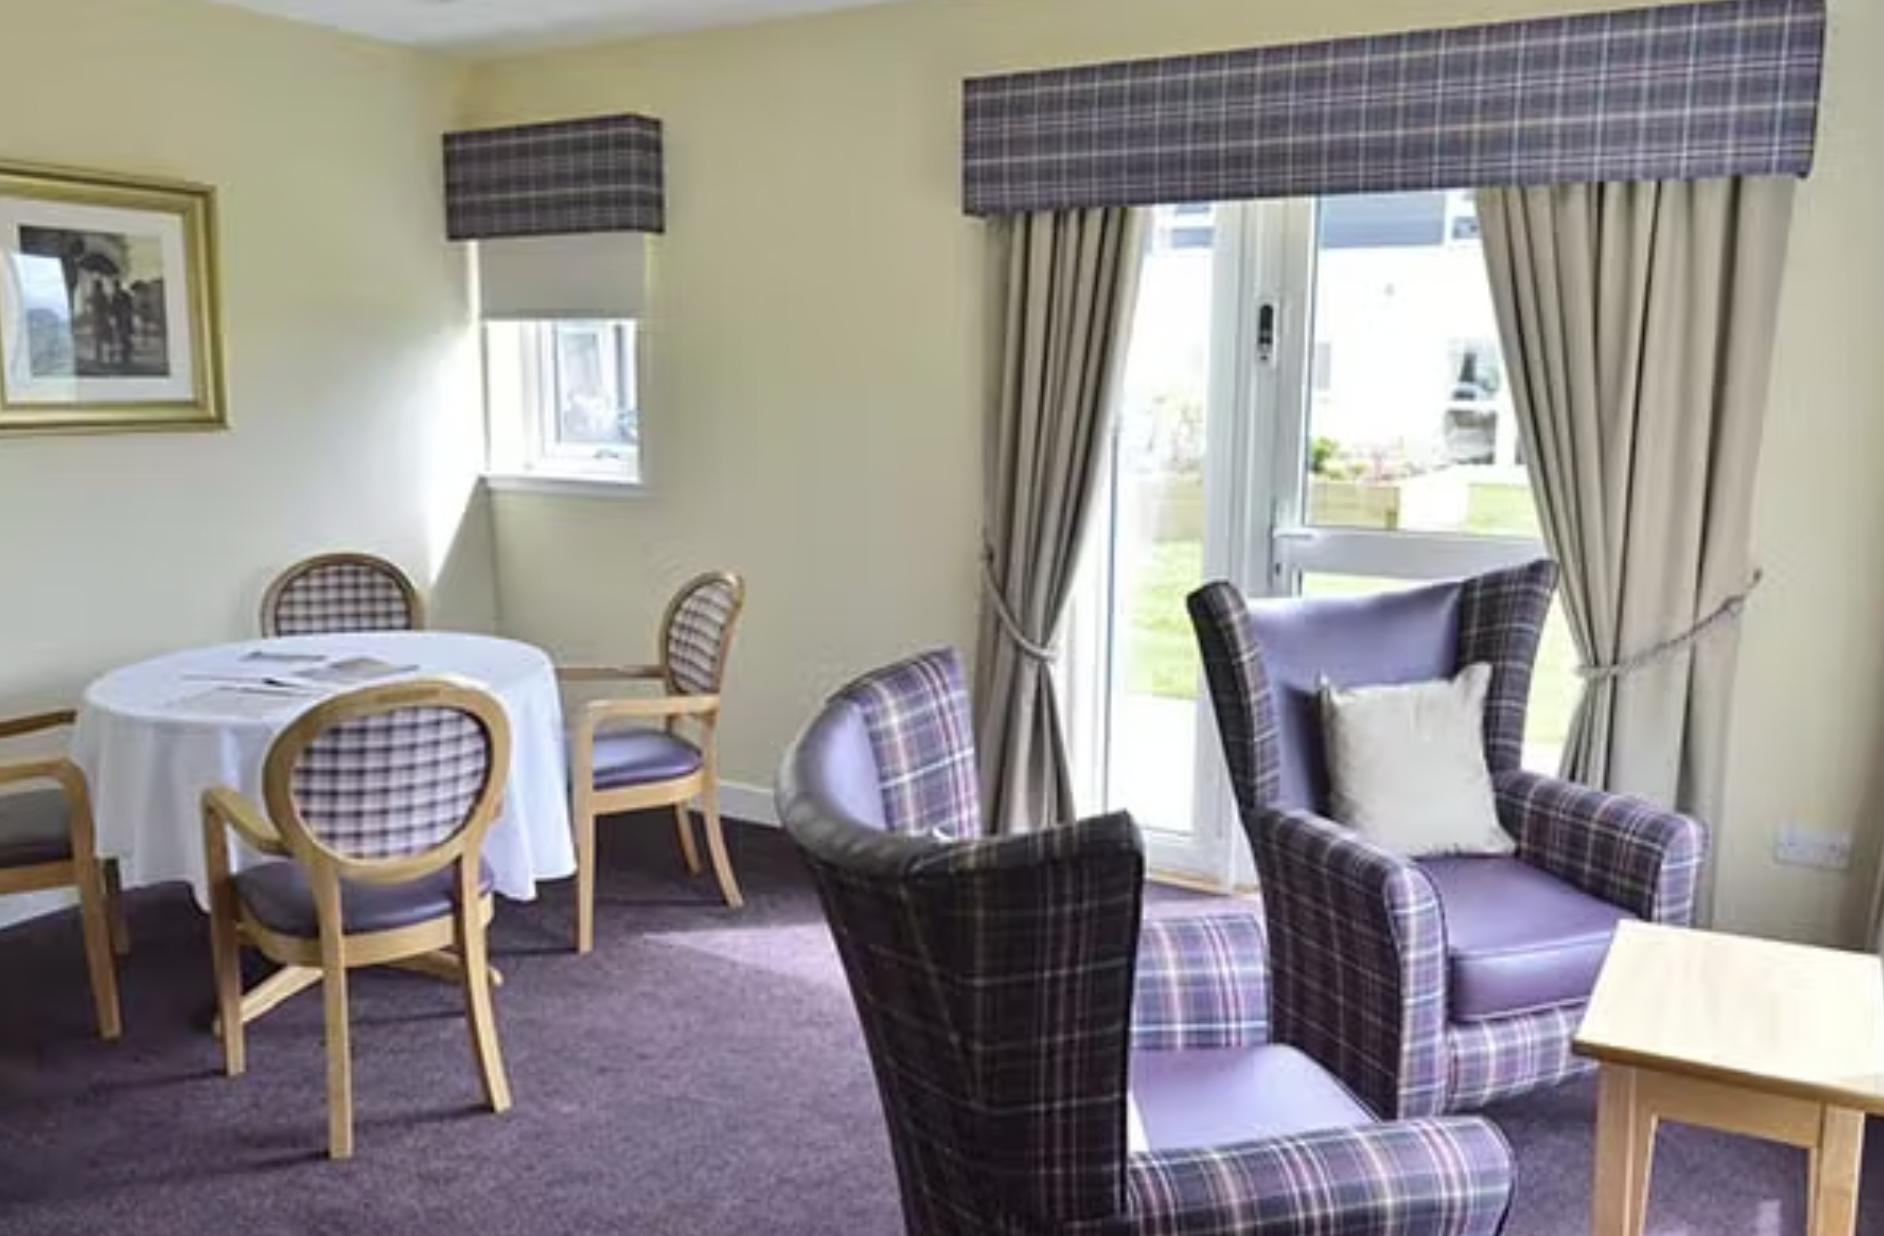 Independent Care Home - Kingsacre care home 4